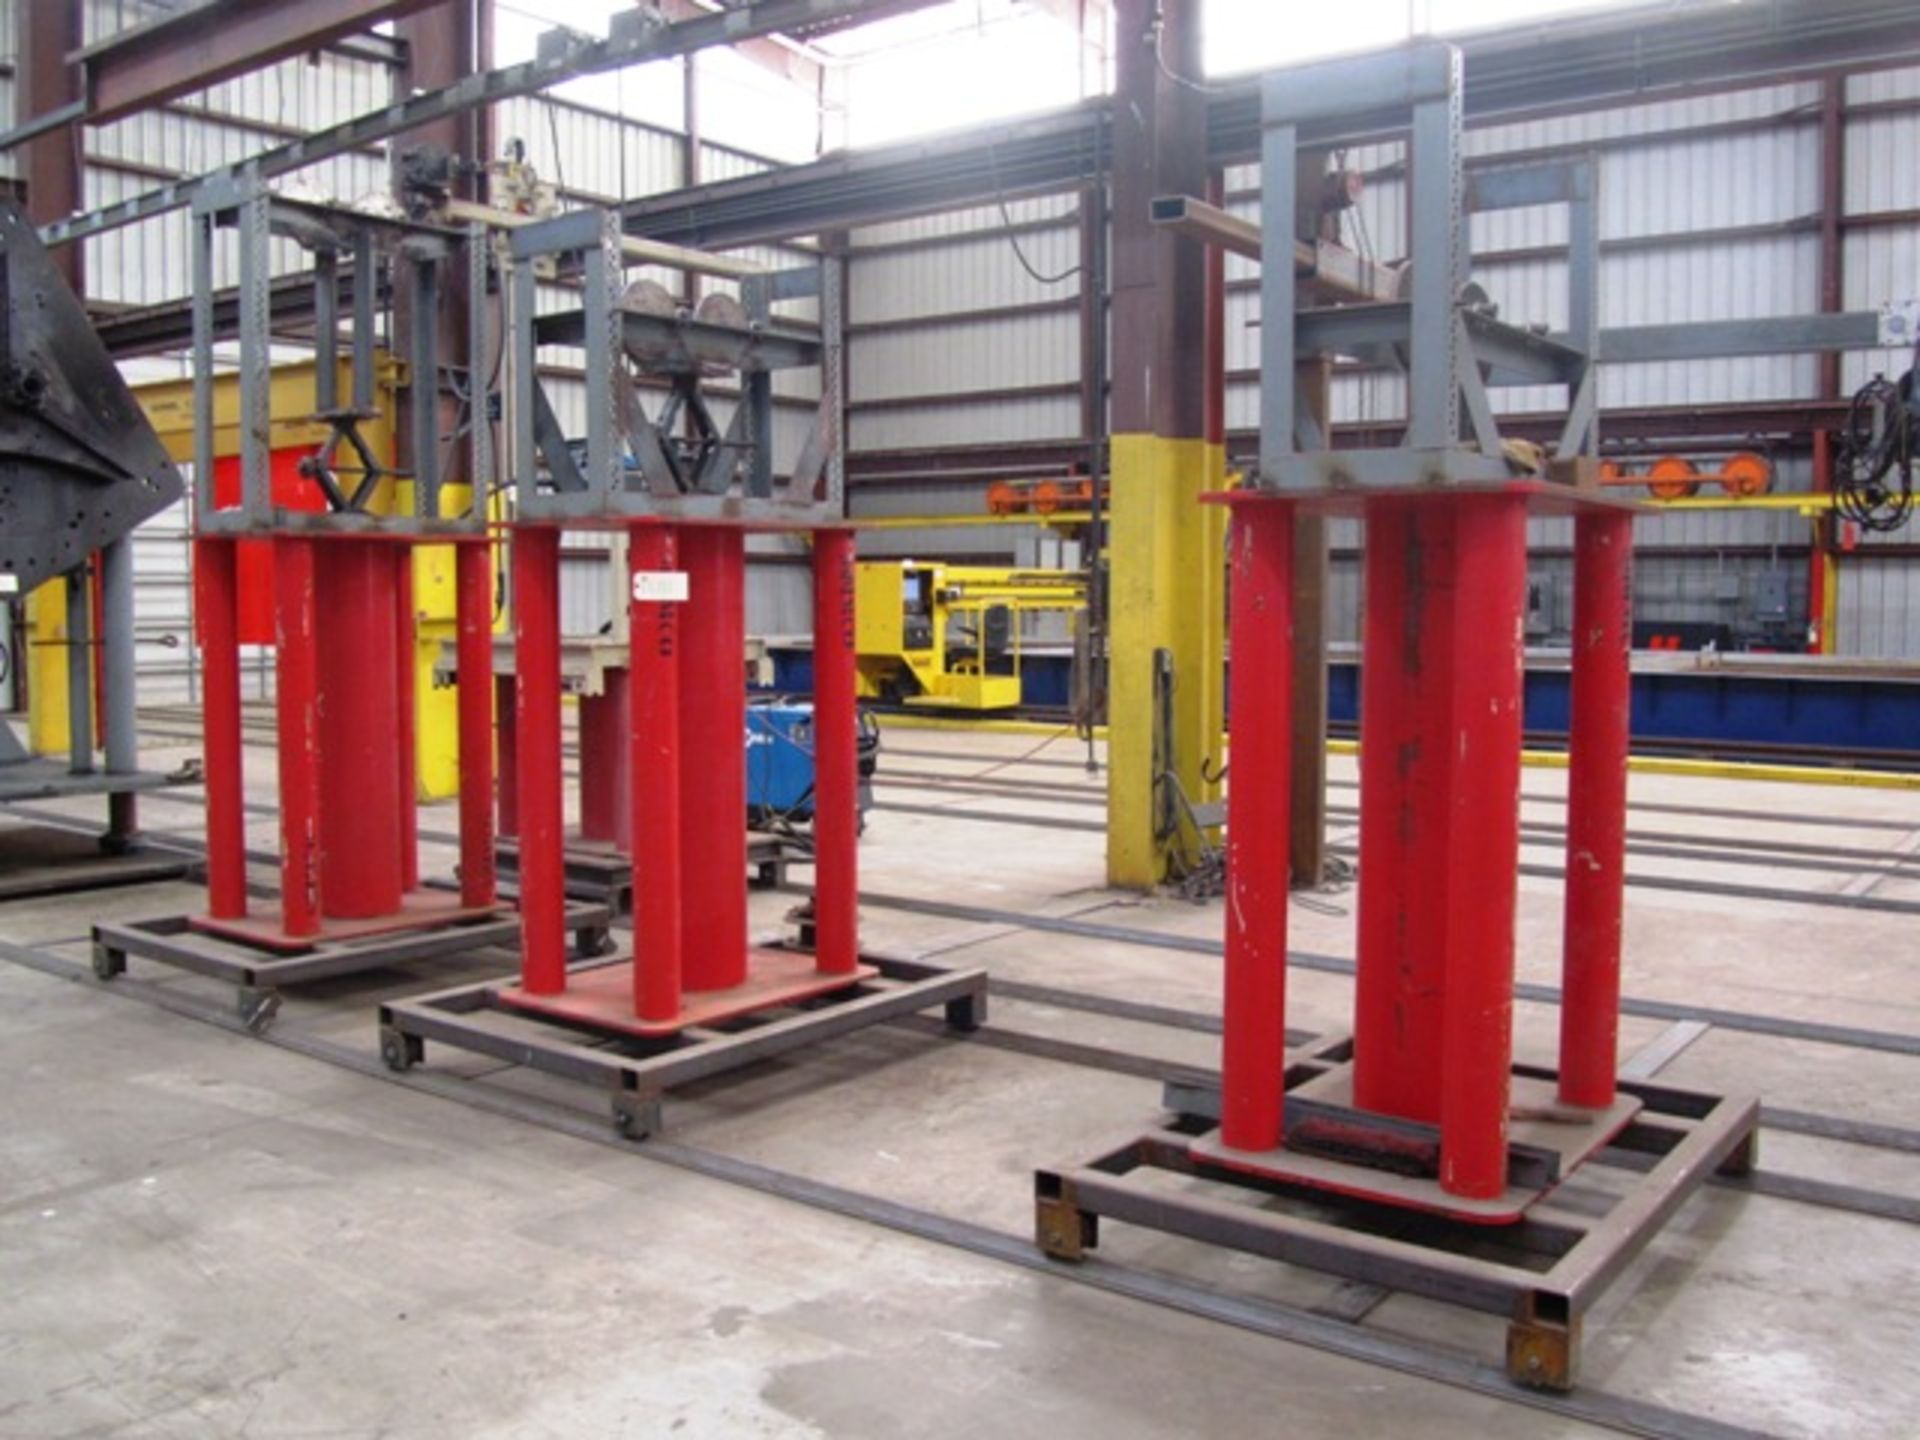 (3) Steel Stands (used with welding positioner & manipulator)